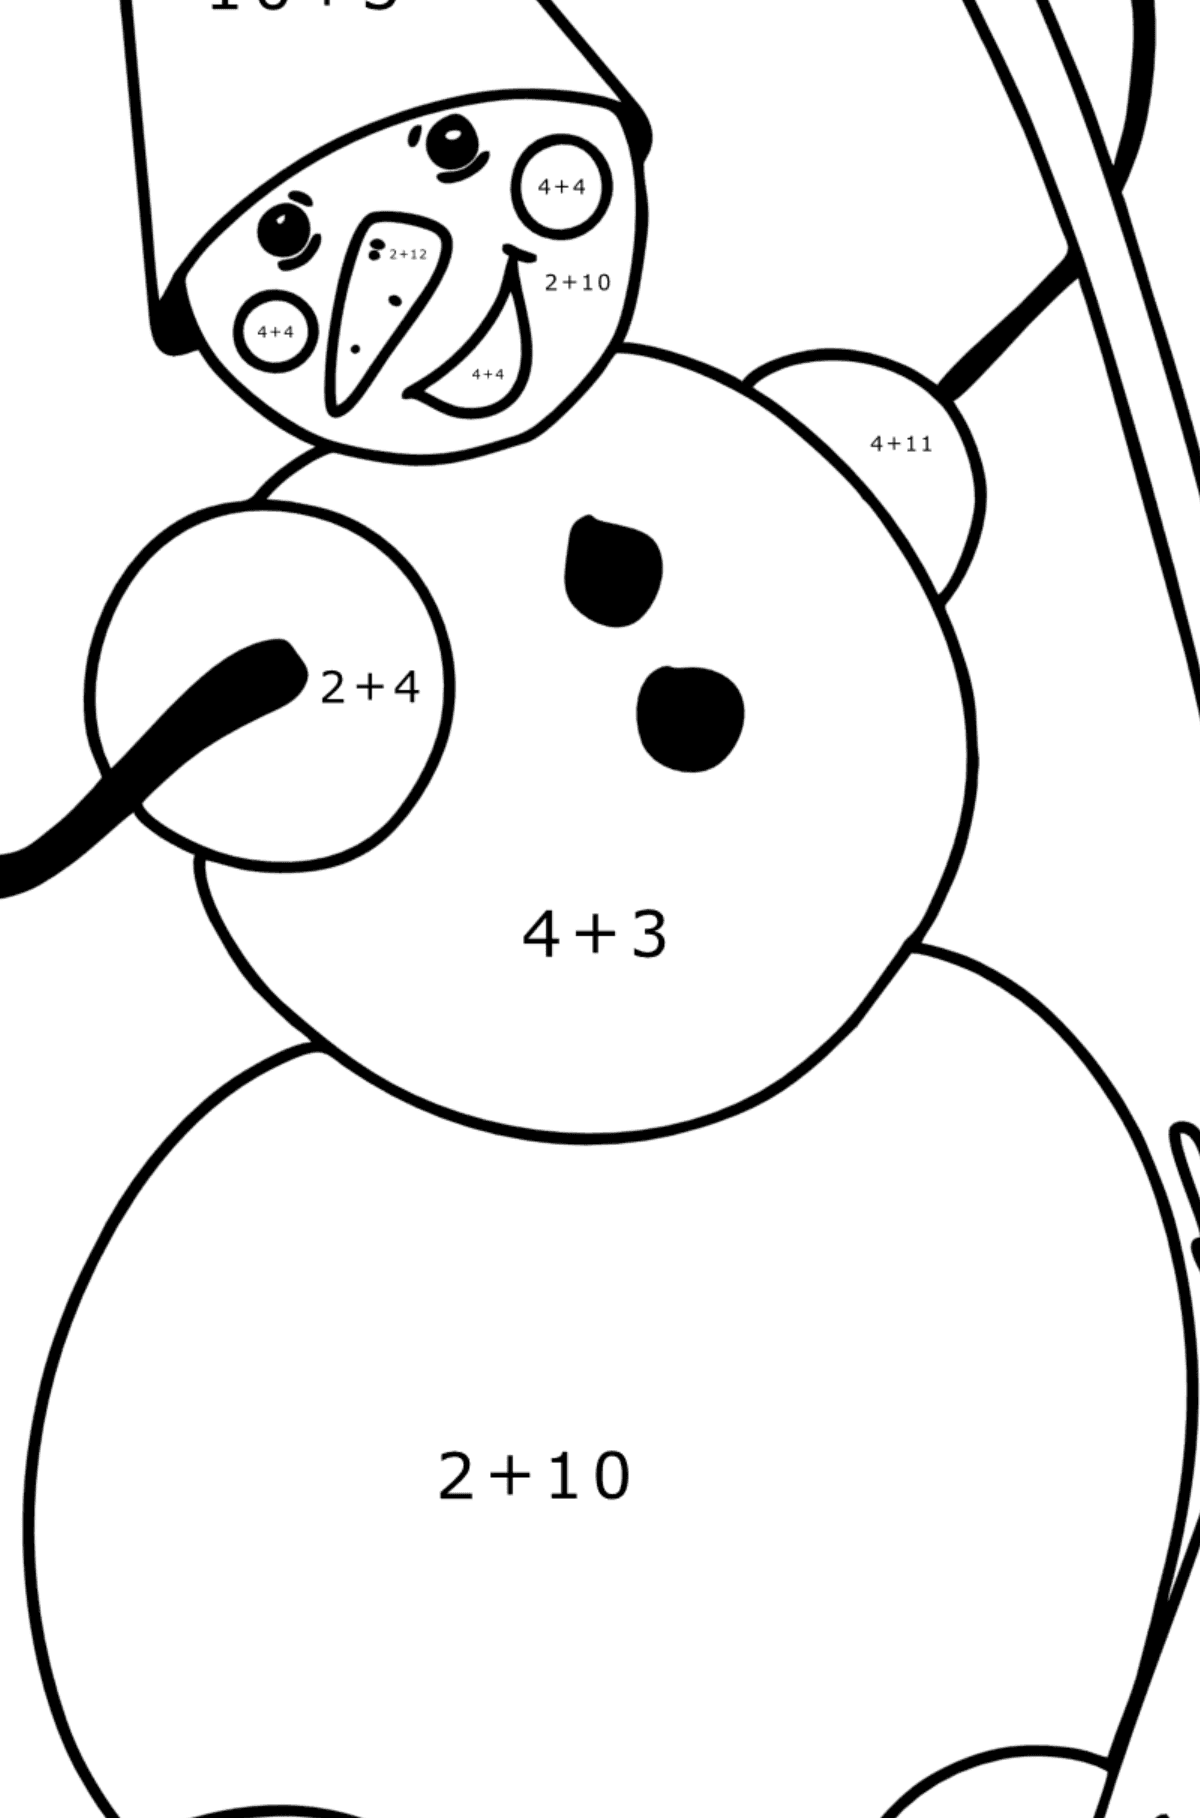 Snowman with Broom coloring page - Math Coloring - Addition for Kids